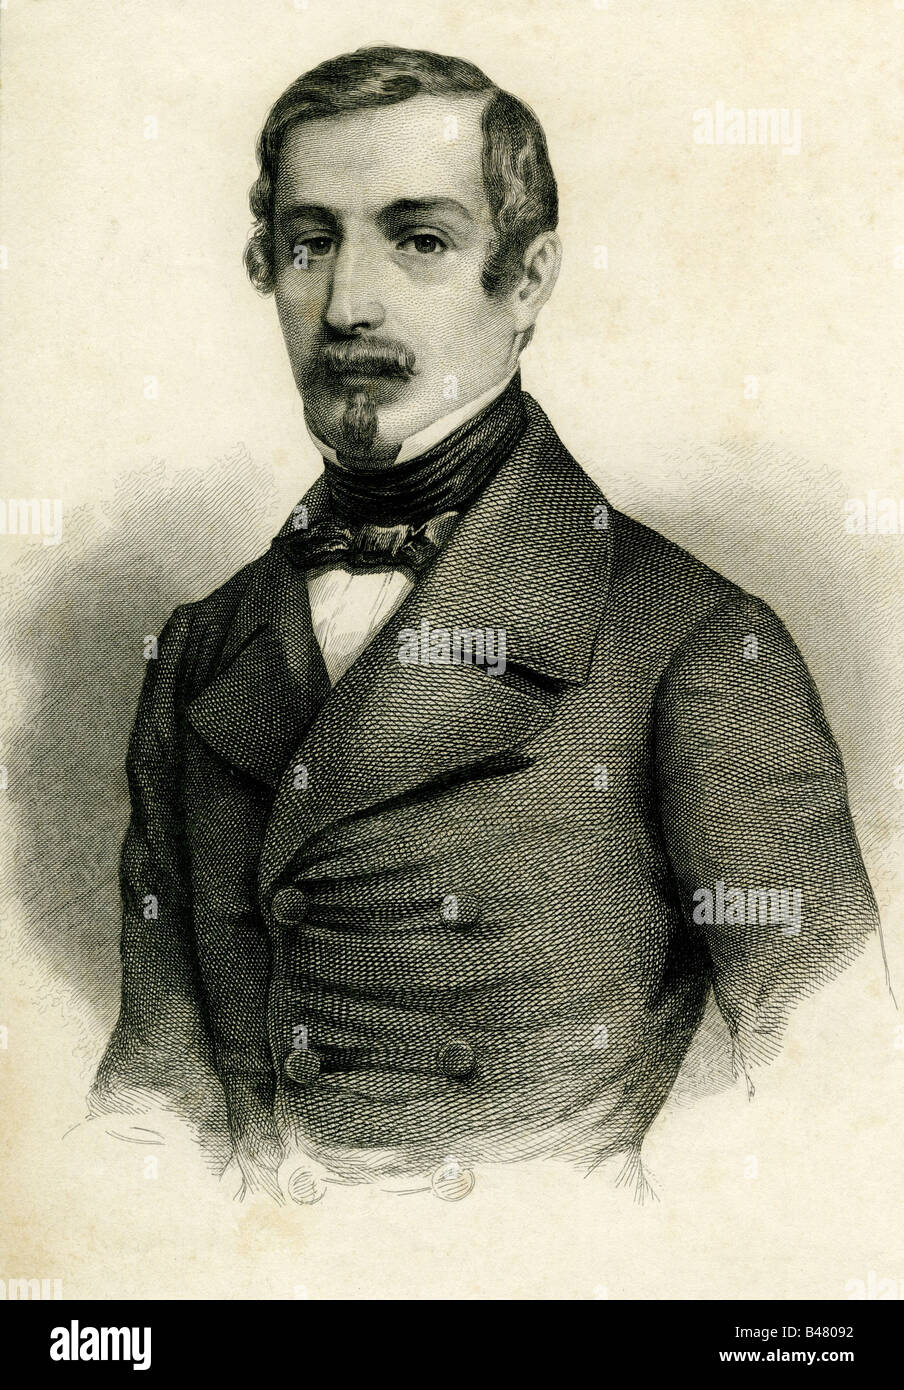 Napoleon III, 20.4.1808 - 9.1.1873, Emperor of the French 2.12.1852 - 2.9.1870, portrait, engraving, 19th century, Charles Louis Napoleon Bonaparte, politician, Preseident of the Second Republic 20.12.1848 - 7.11.1852, France, , Artist's Copyright has not to be cleared Stock Photo